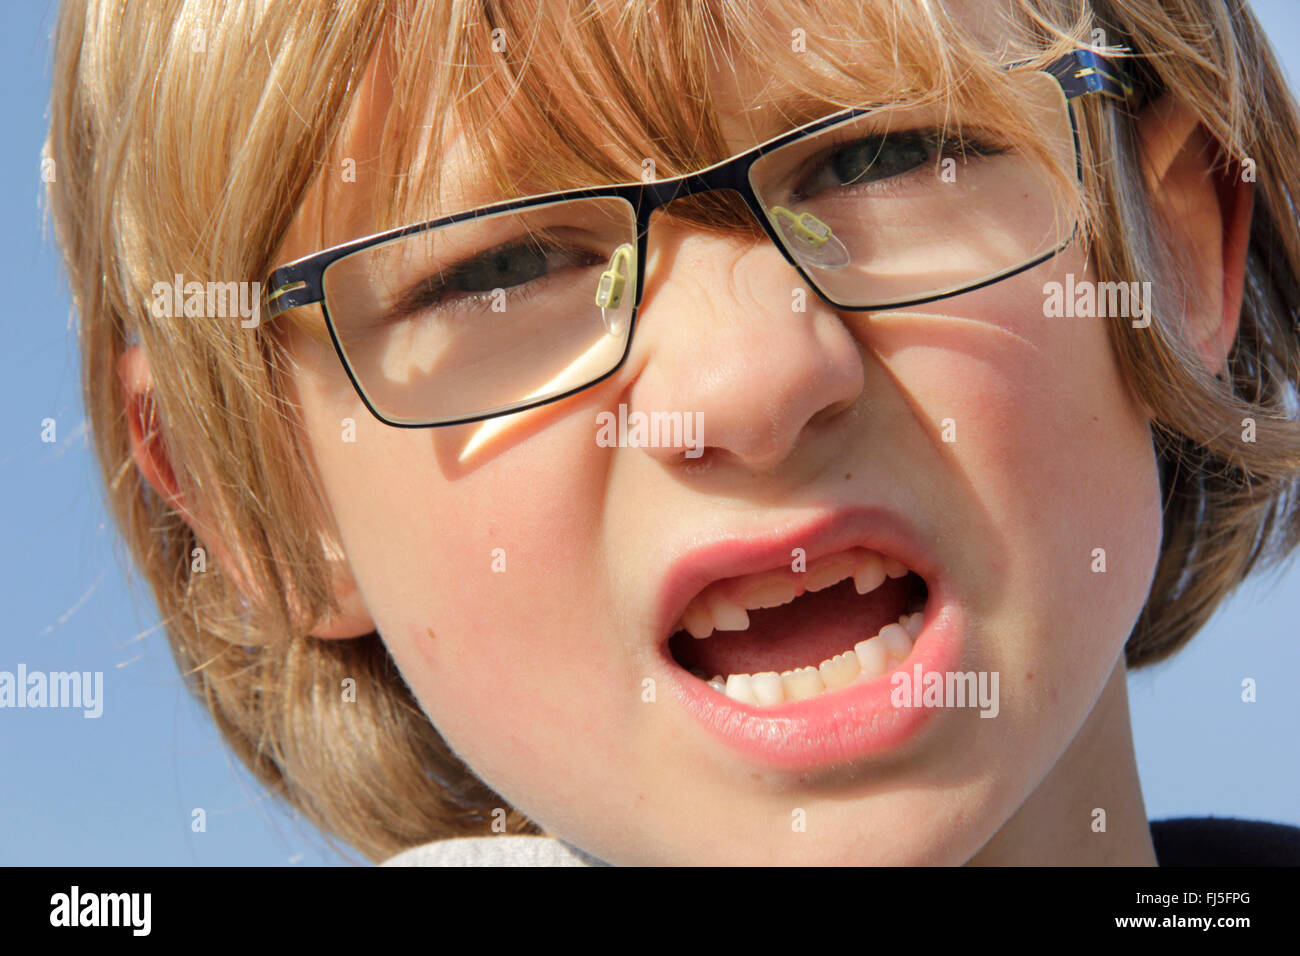 little boy with the second incisors, permanent dentition, portrait of a child Stock Photo